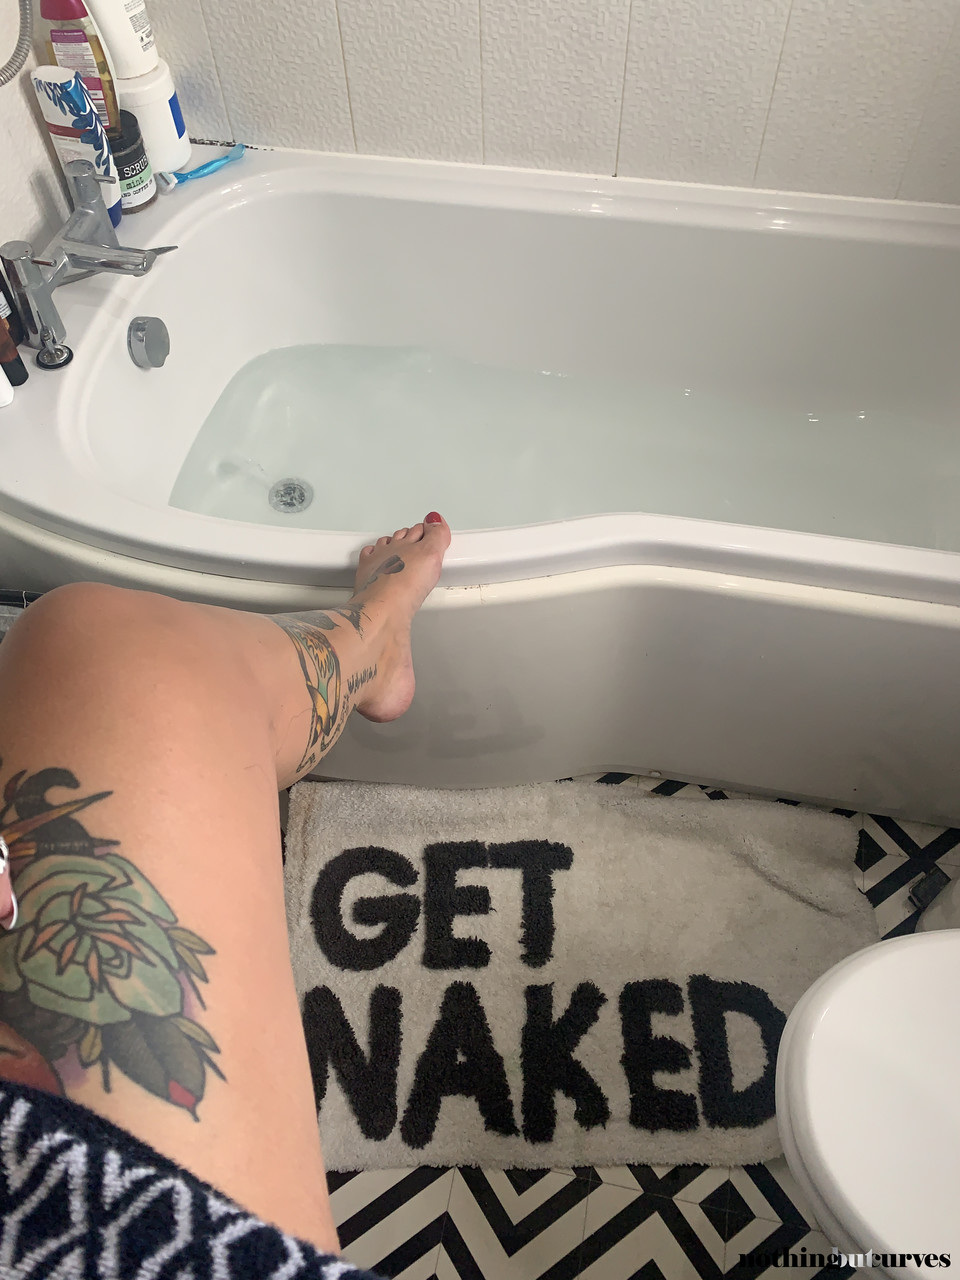 Inked fatty Cherrie Pie flaunts her big breasts while having a bath photo porno #424173946 | Nothing But Curves Pics, Cherrie Pie, Tattoo, porno mobile